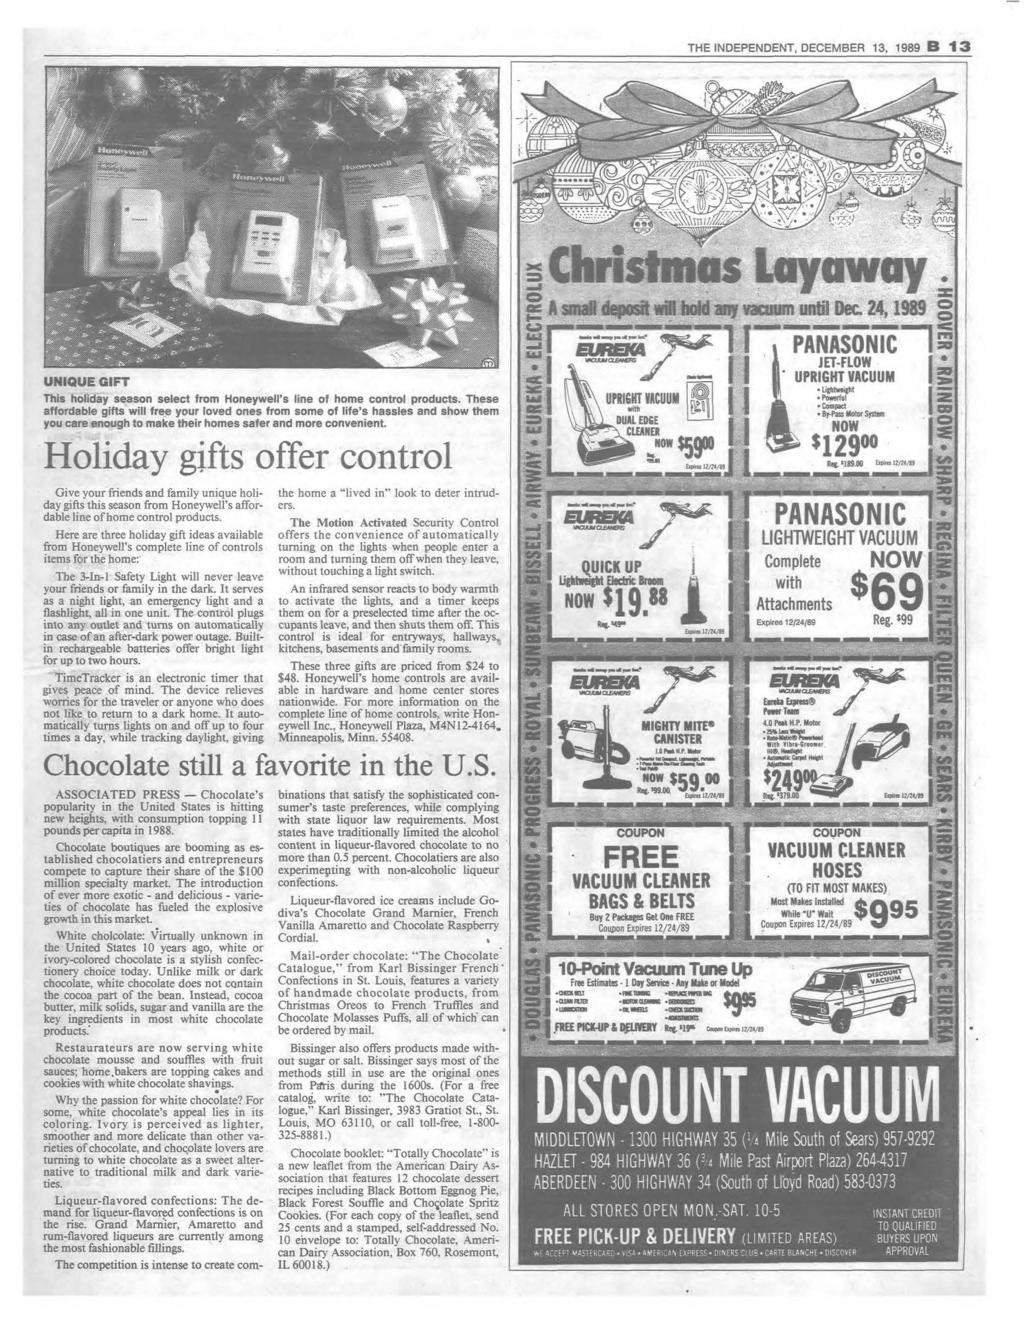 THE INDEPENDENT, DECEM BER 13, 1989 B 1 3 C h r is tm a s L a y a w a y A small deposit will hold any vacuum until Bee, 24,1989 UNIQUE GIFT This holiday season select from Honeywell s line of home